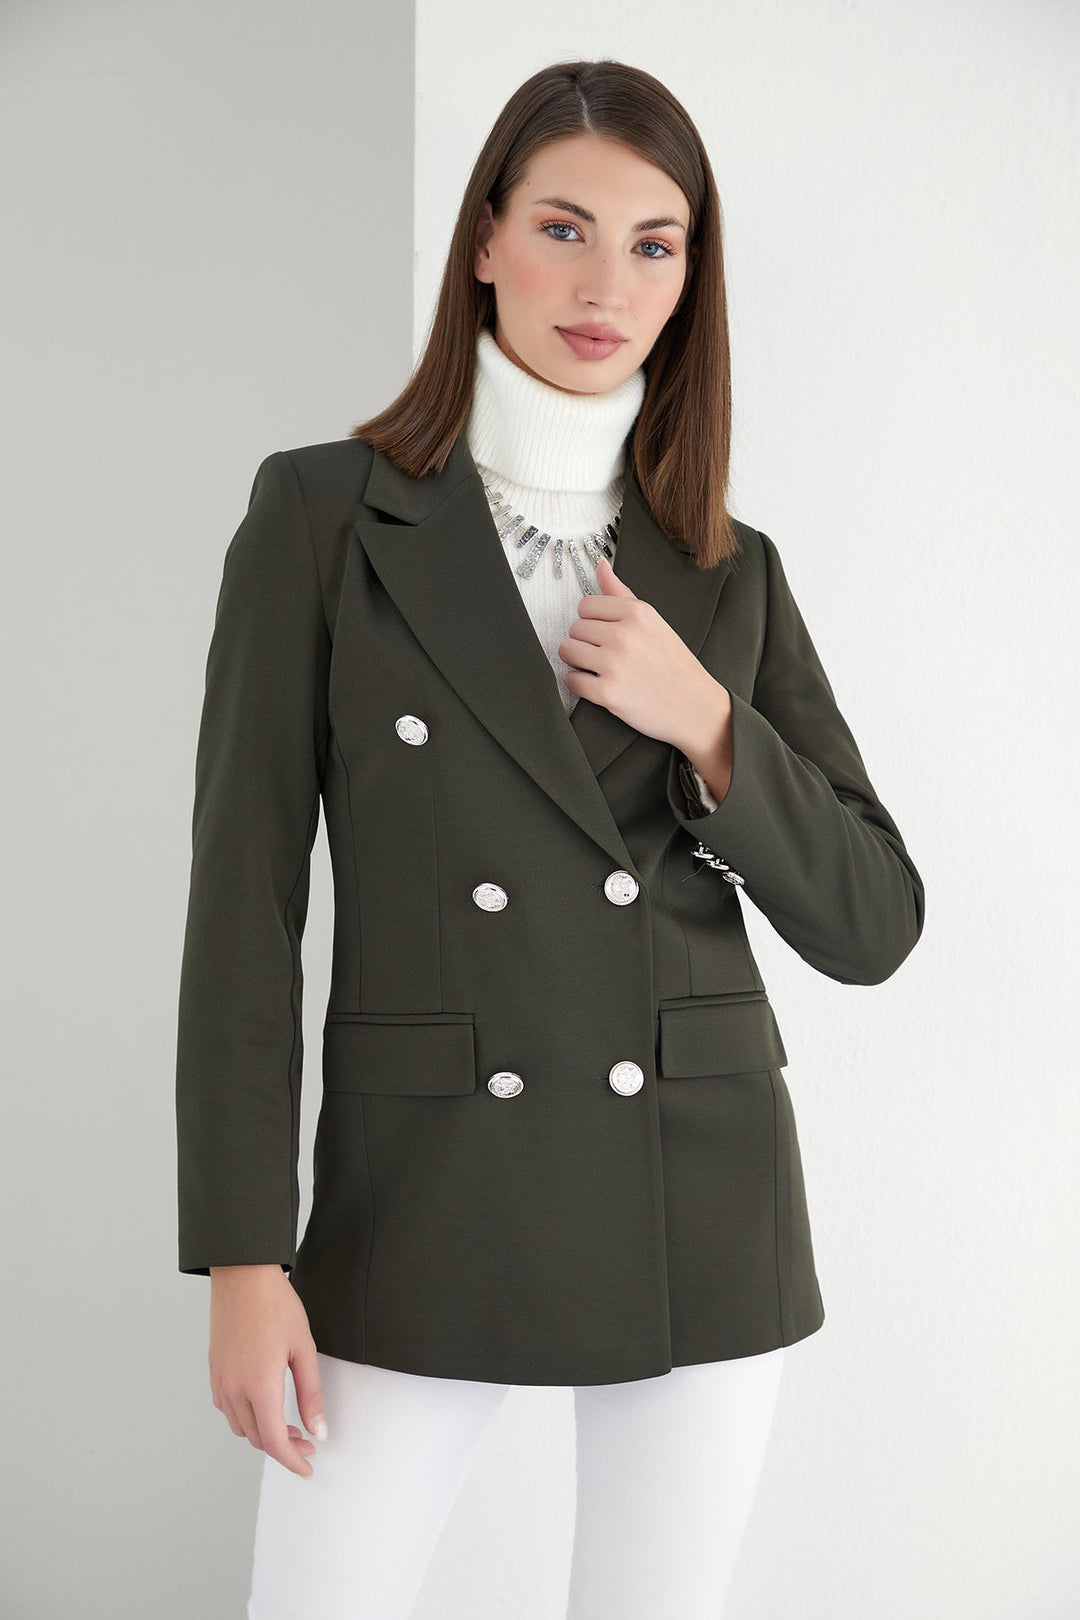 Double Breasted Blazer with Gold Buttons in Khaki